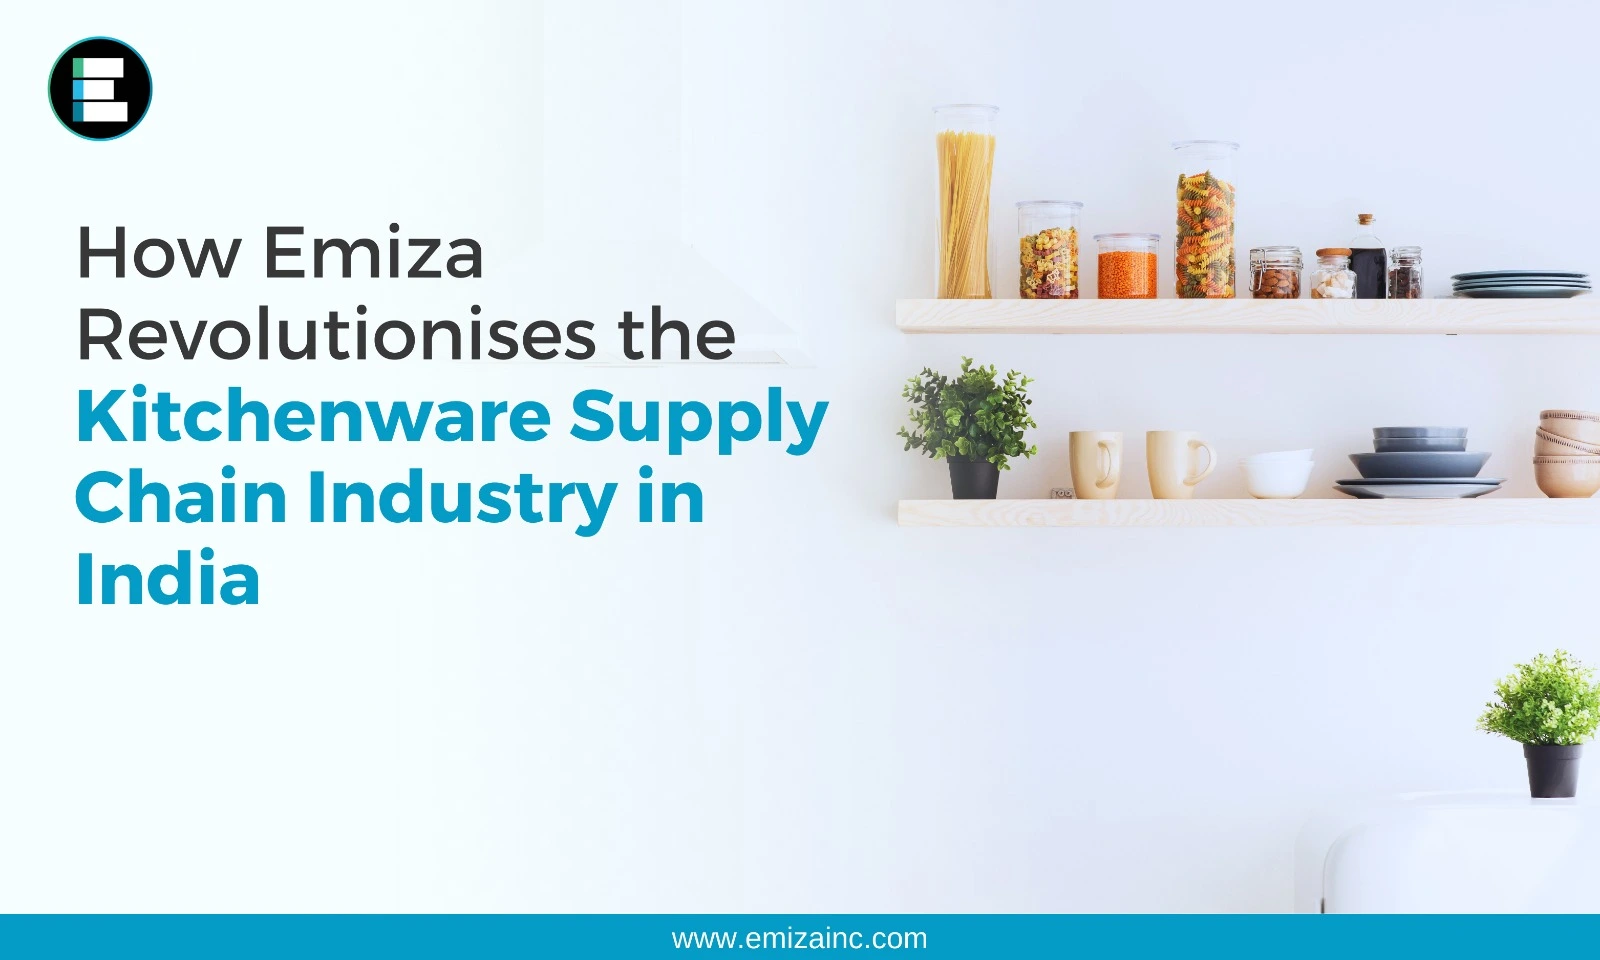 How Emiza Revolutionises the Kitchenware Supply Chain Industry in India